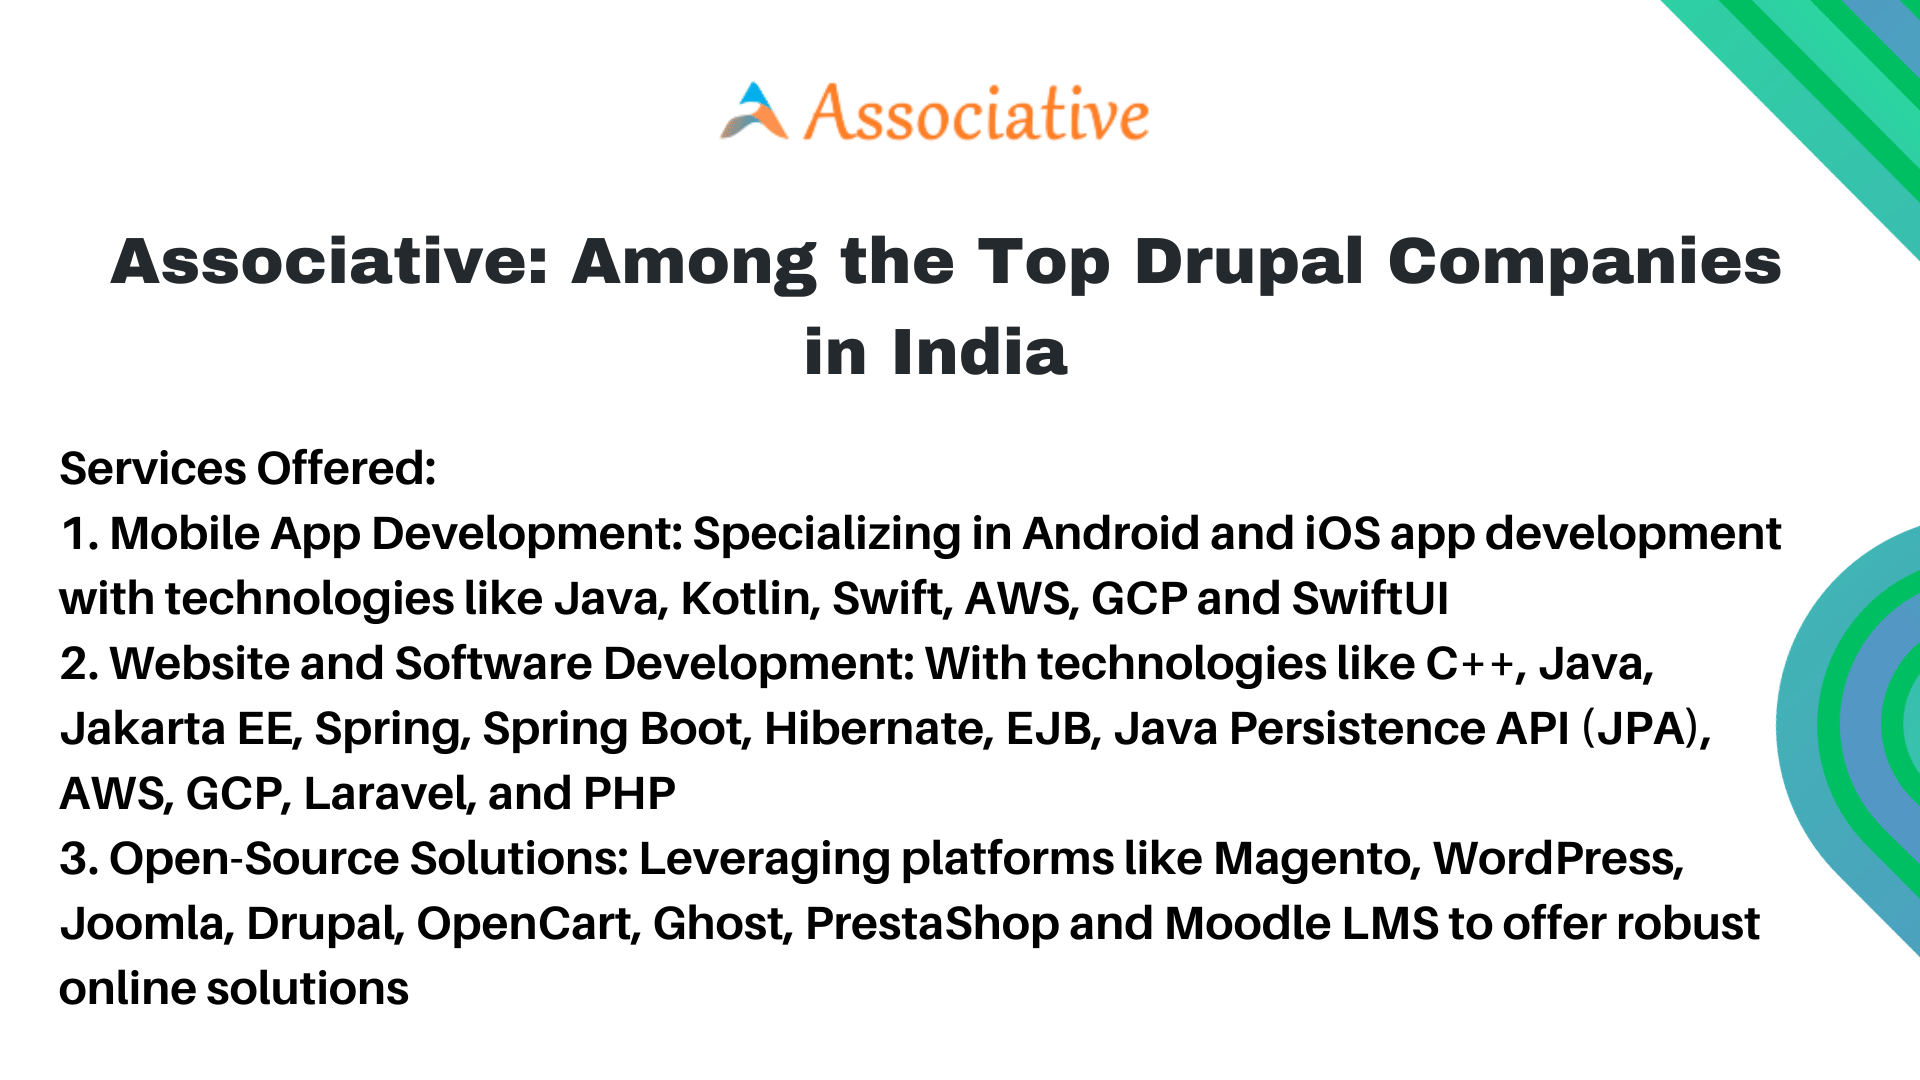 Associative Among the Top Drupal Companies in India